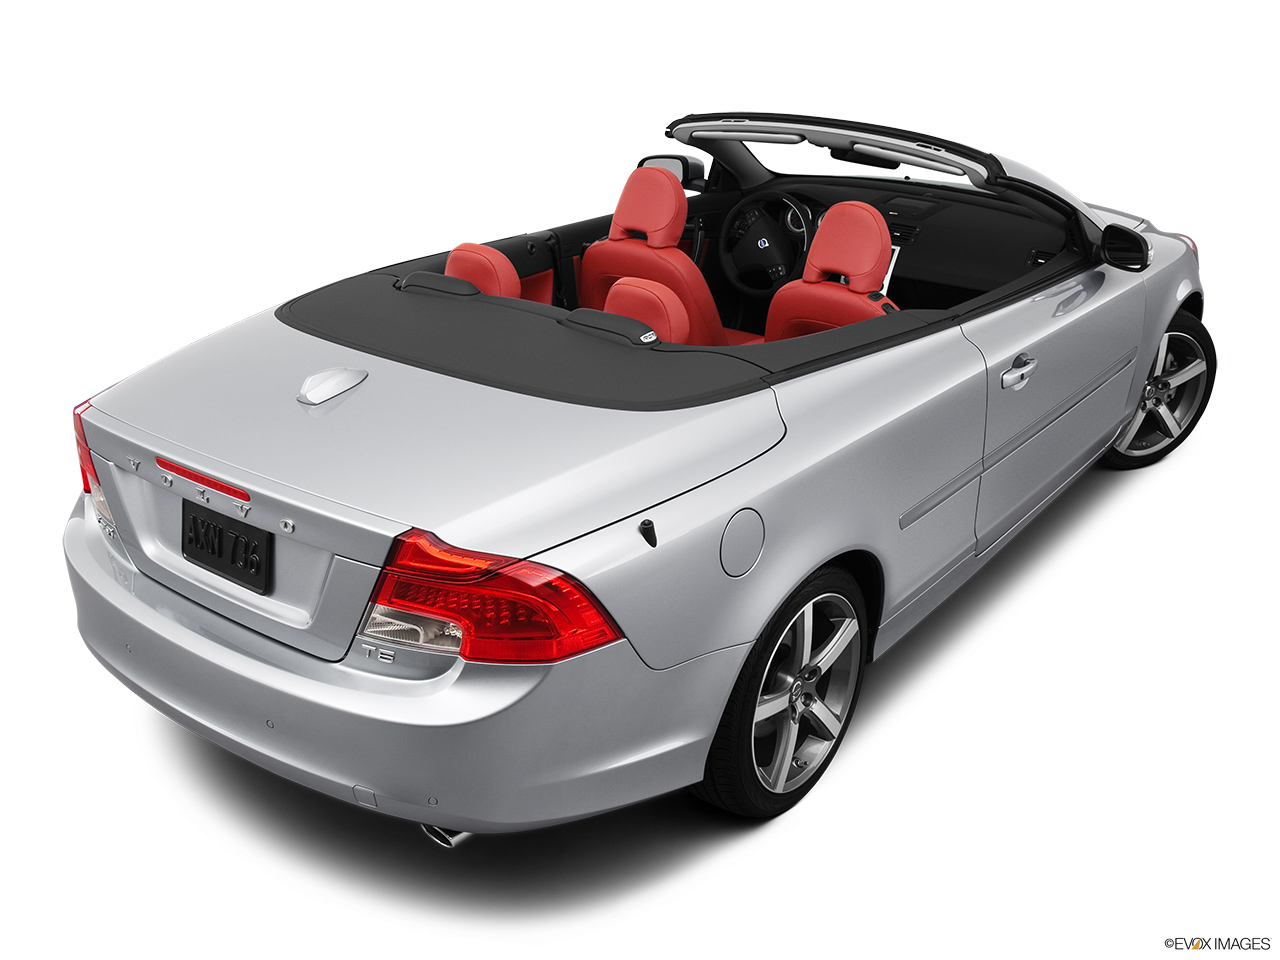 2012 Volvo C70 T5 Rear 3/4 angle view. 